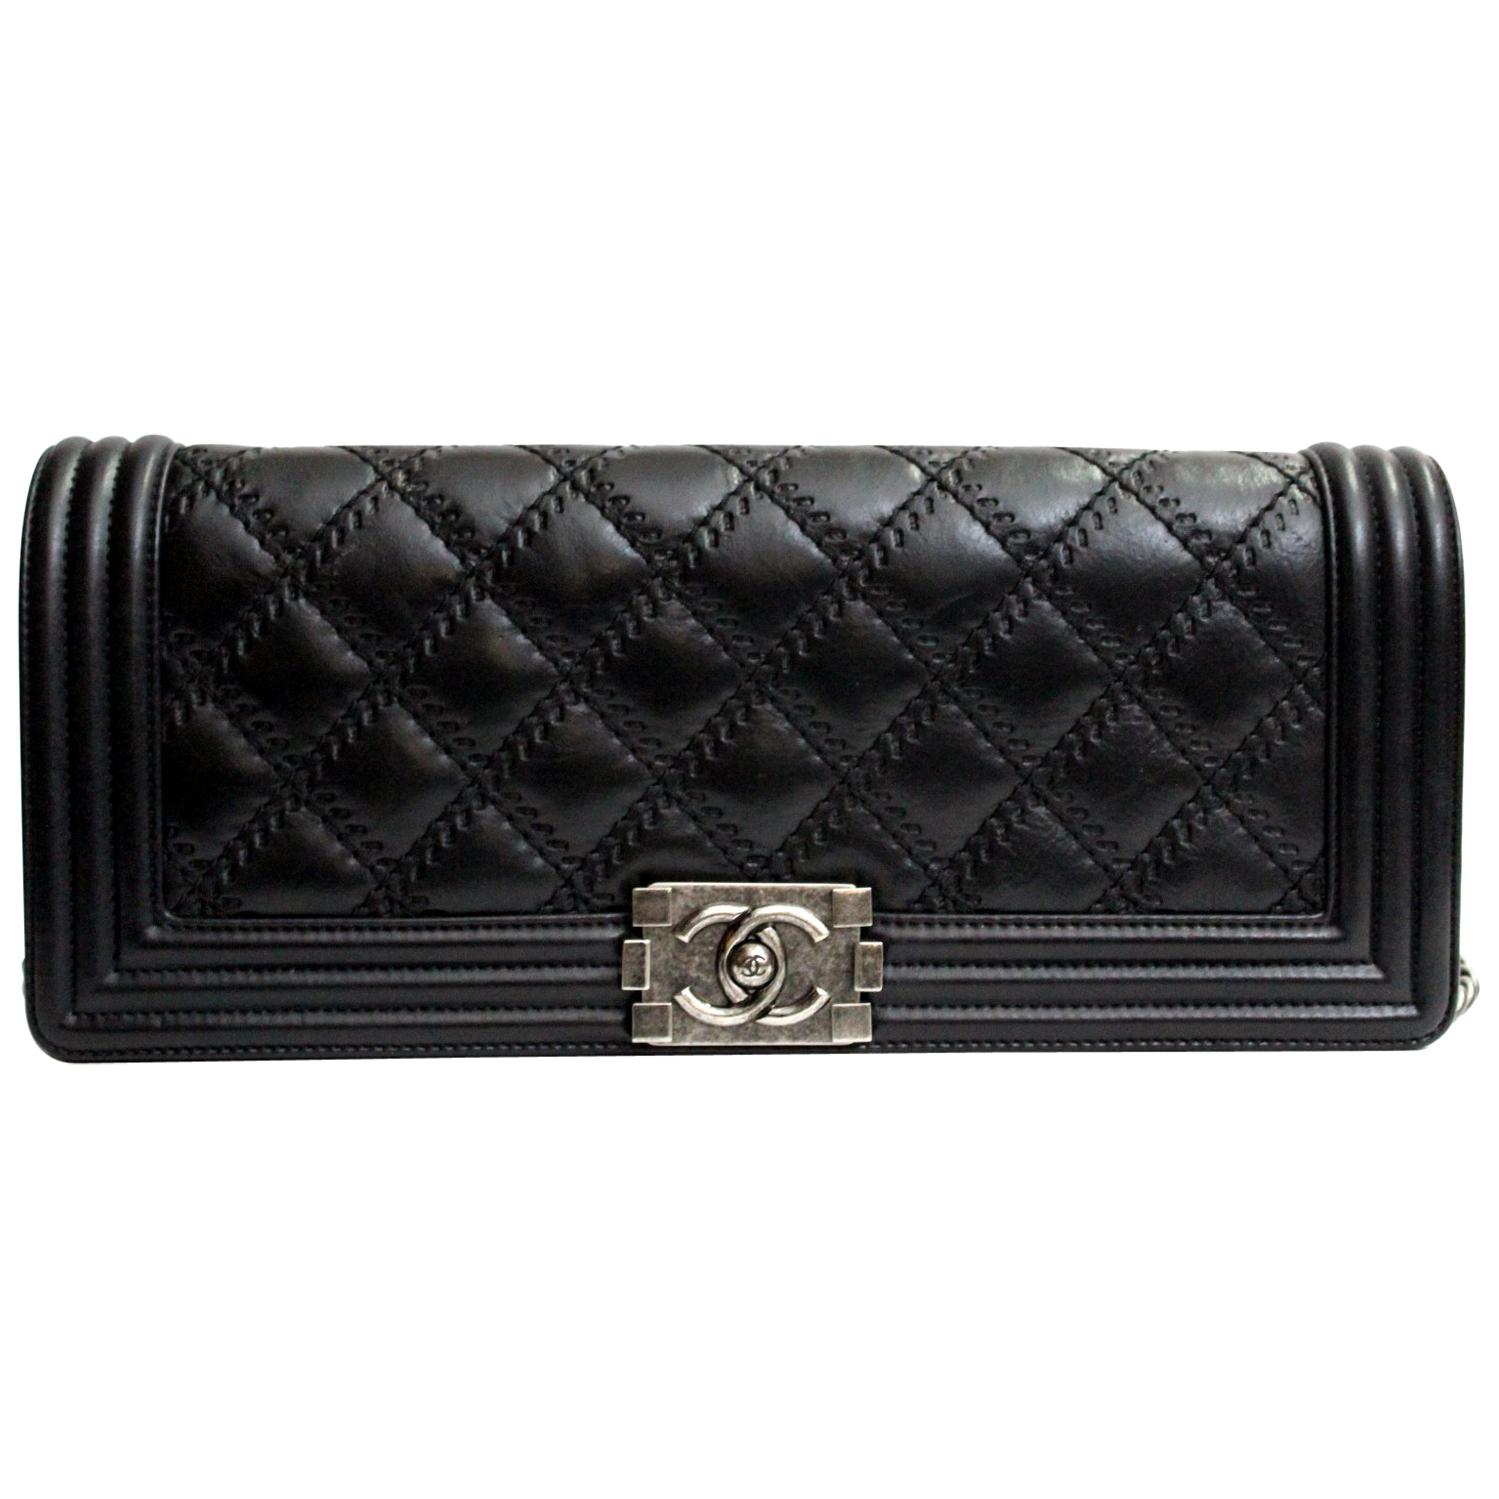 Chanel Black Leather Quilted Long Boy Clutch Bag 